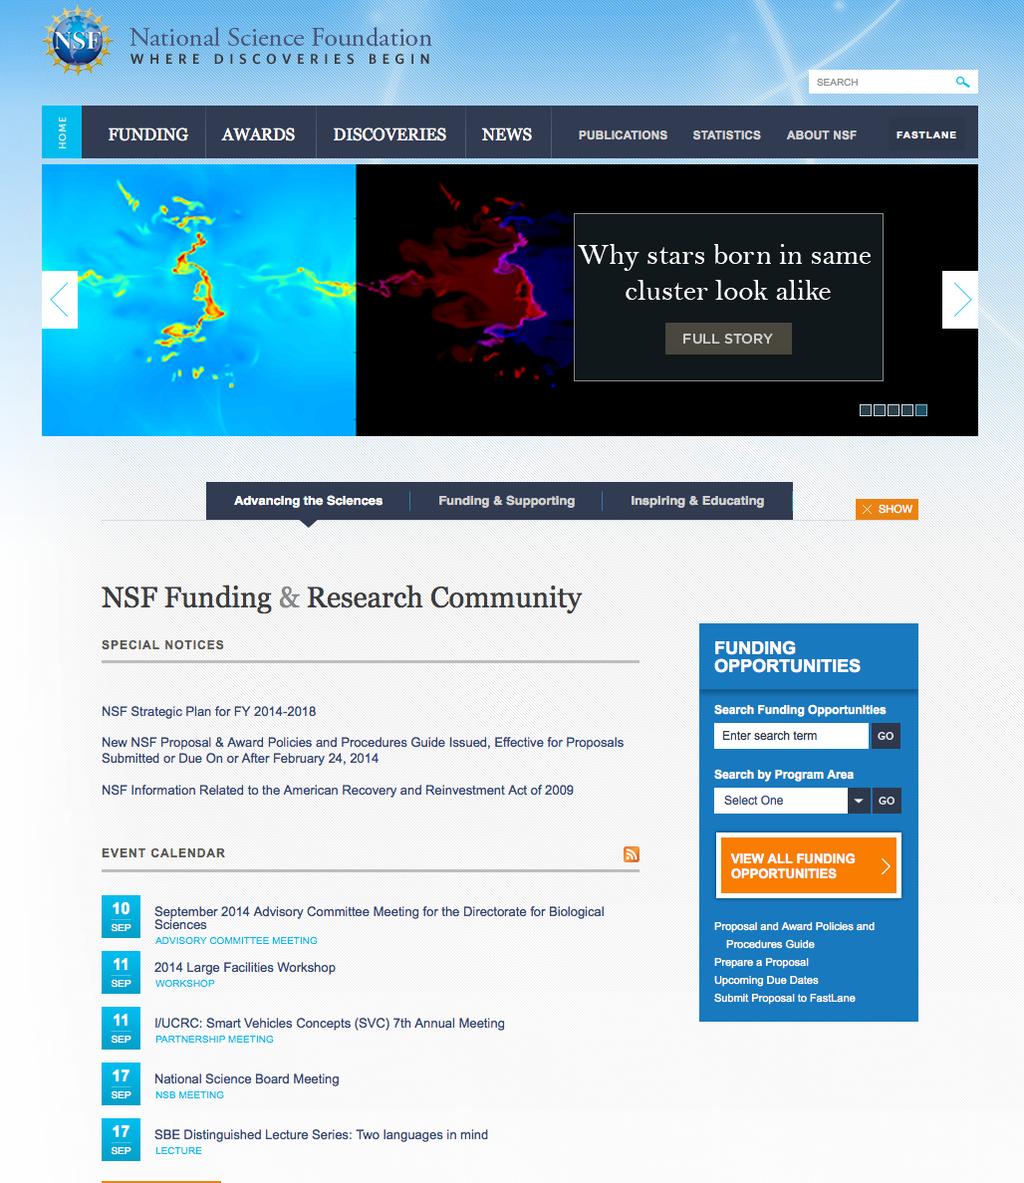 Subscribe to get NSF updates by email at www.nsf.gov. Subscribe to receive special CISE announcements: Send a message to: join-ciseannounce@lists.